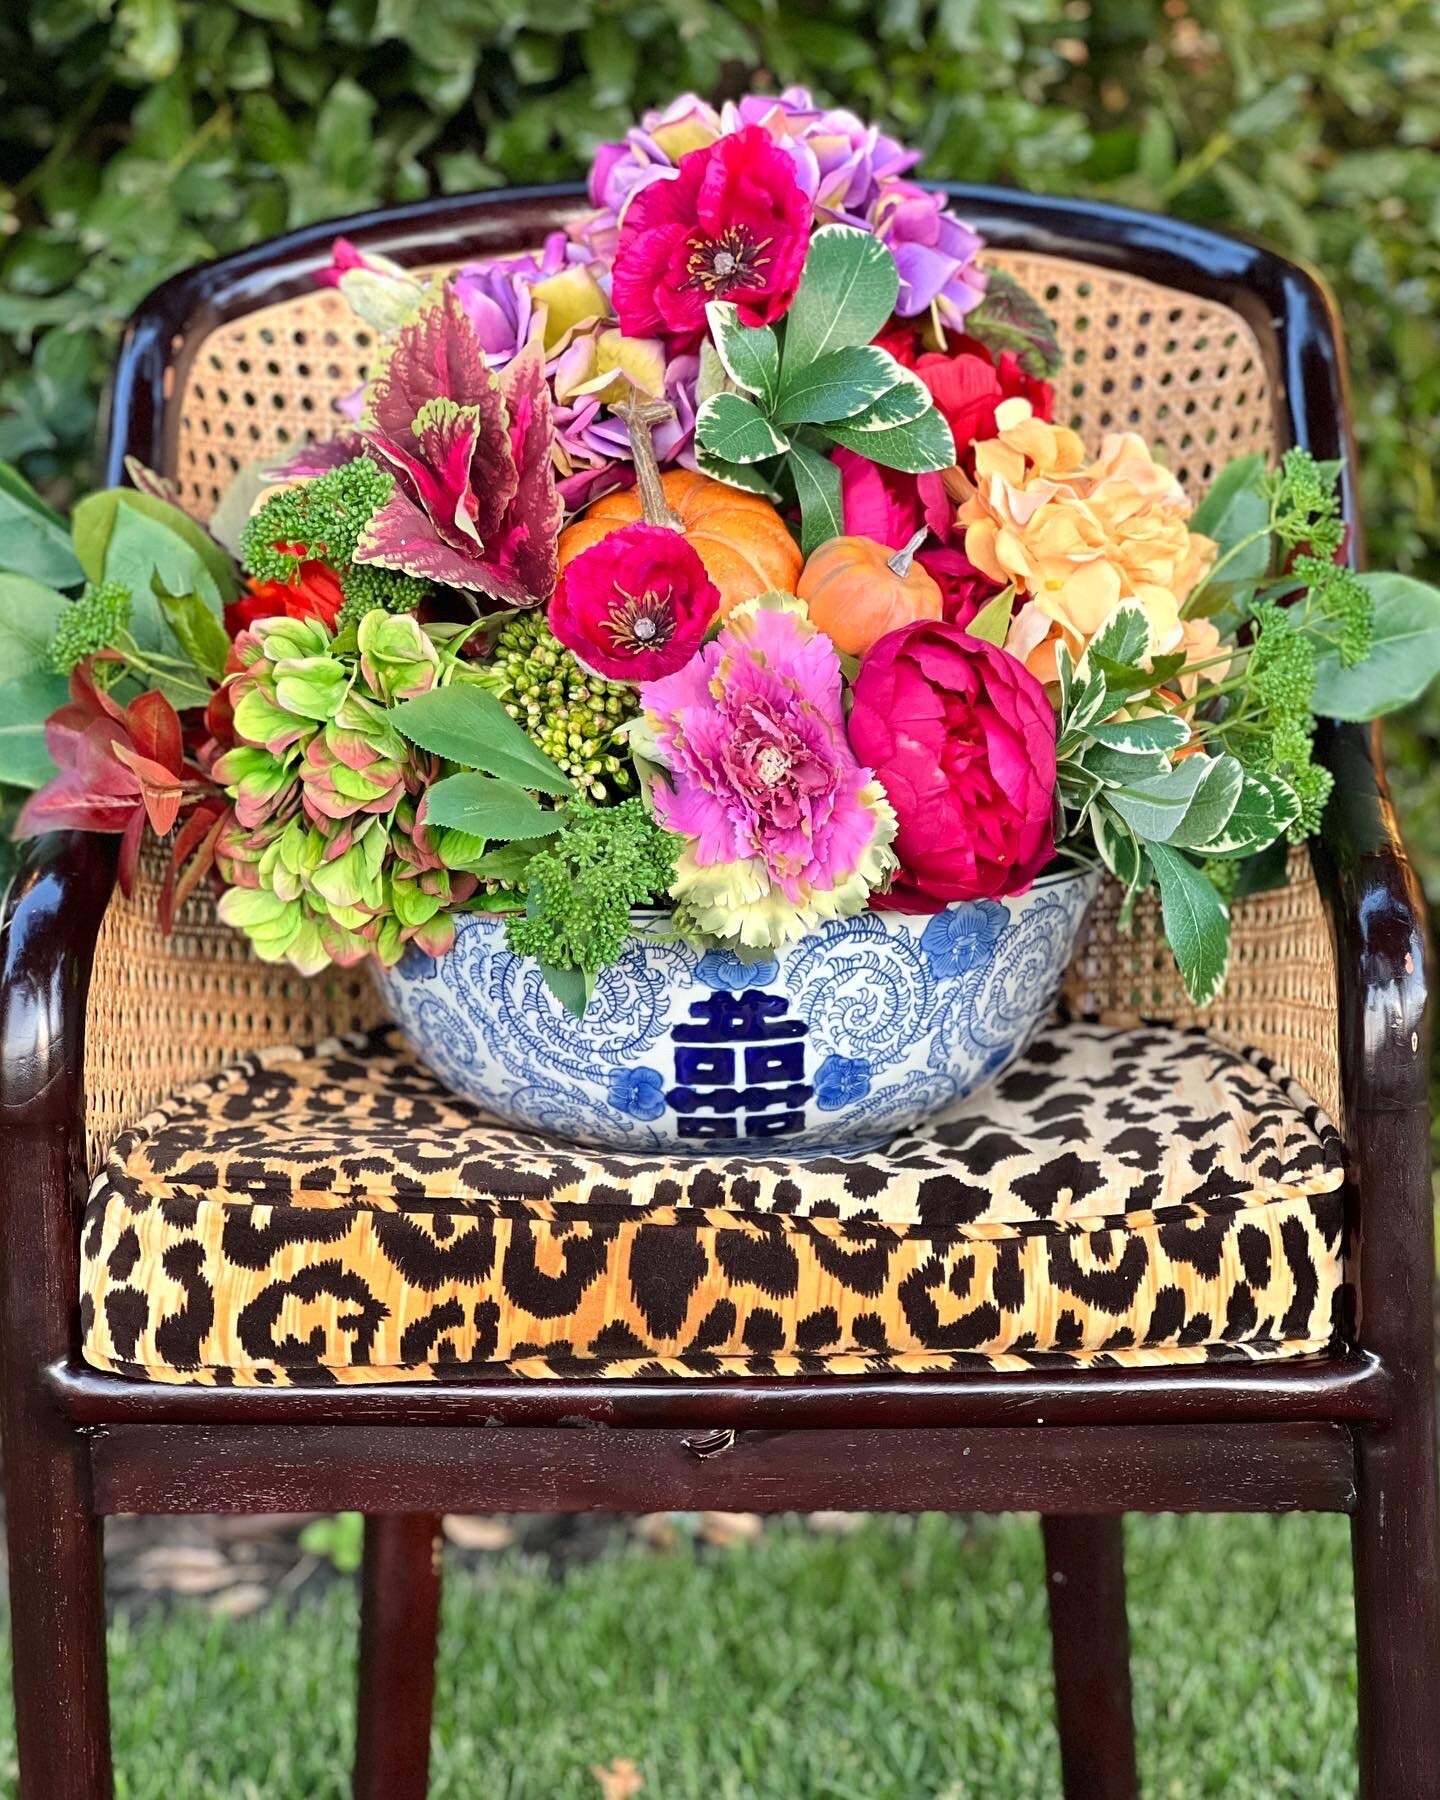 Large drop-in Fall flower arrangement (bowl not included)